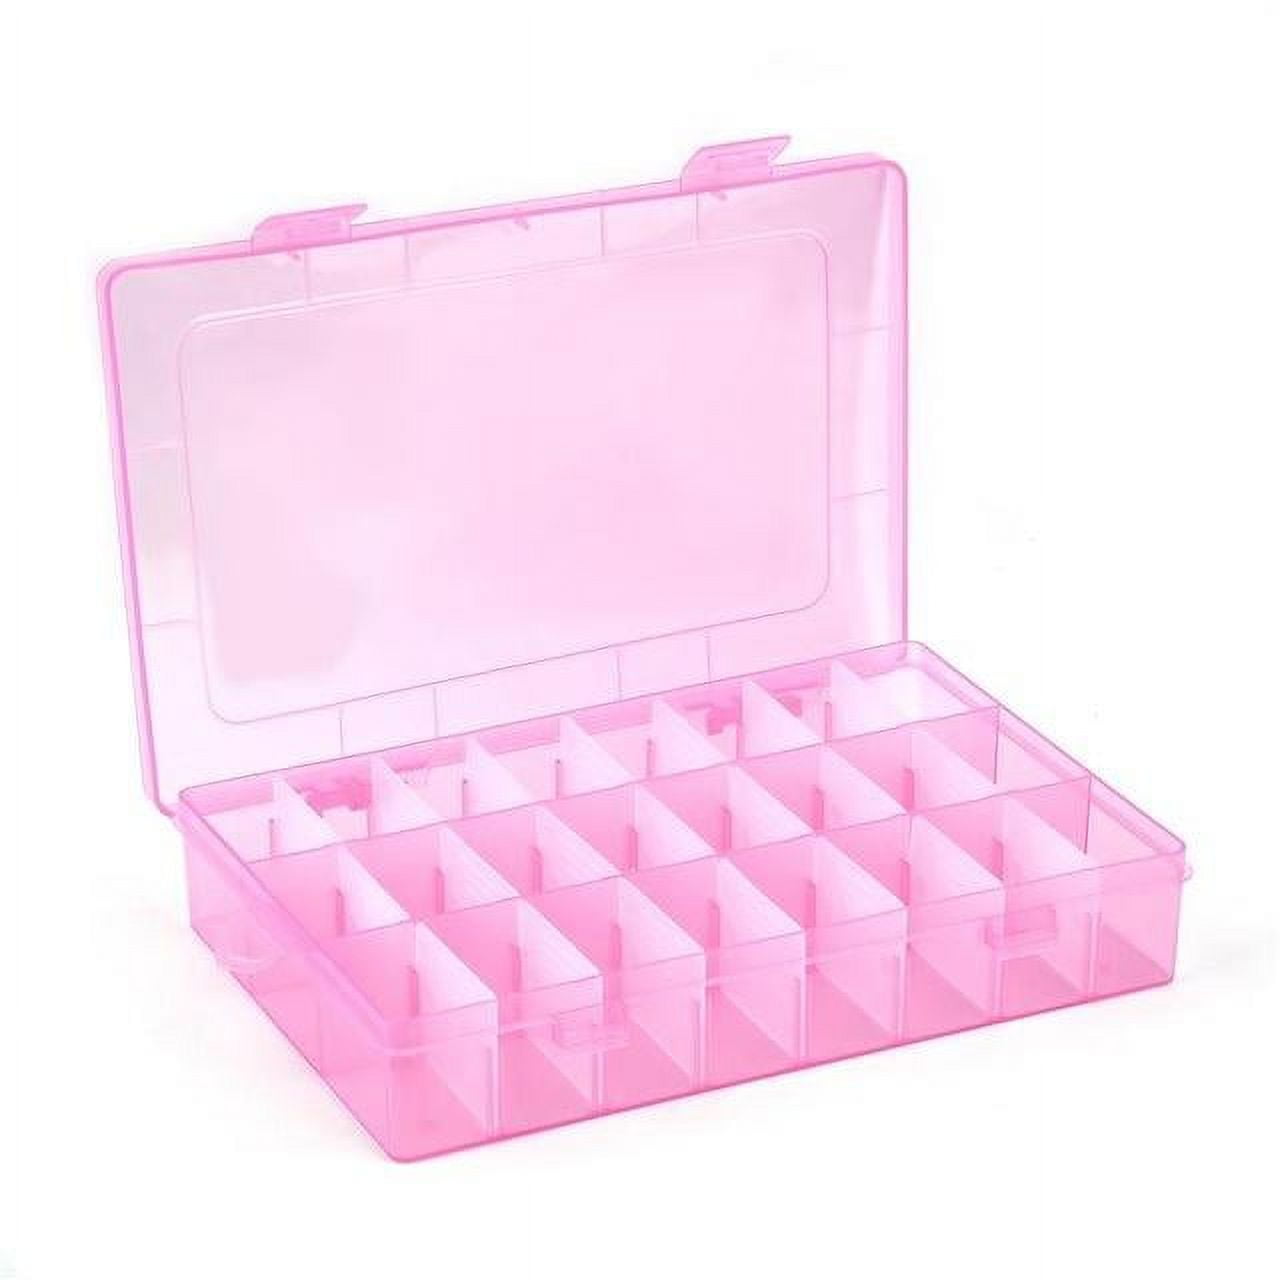 Enowise-YL Transparent Plastic Embroidery Floss Storage Box Floss